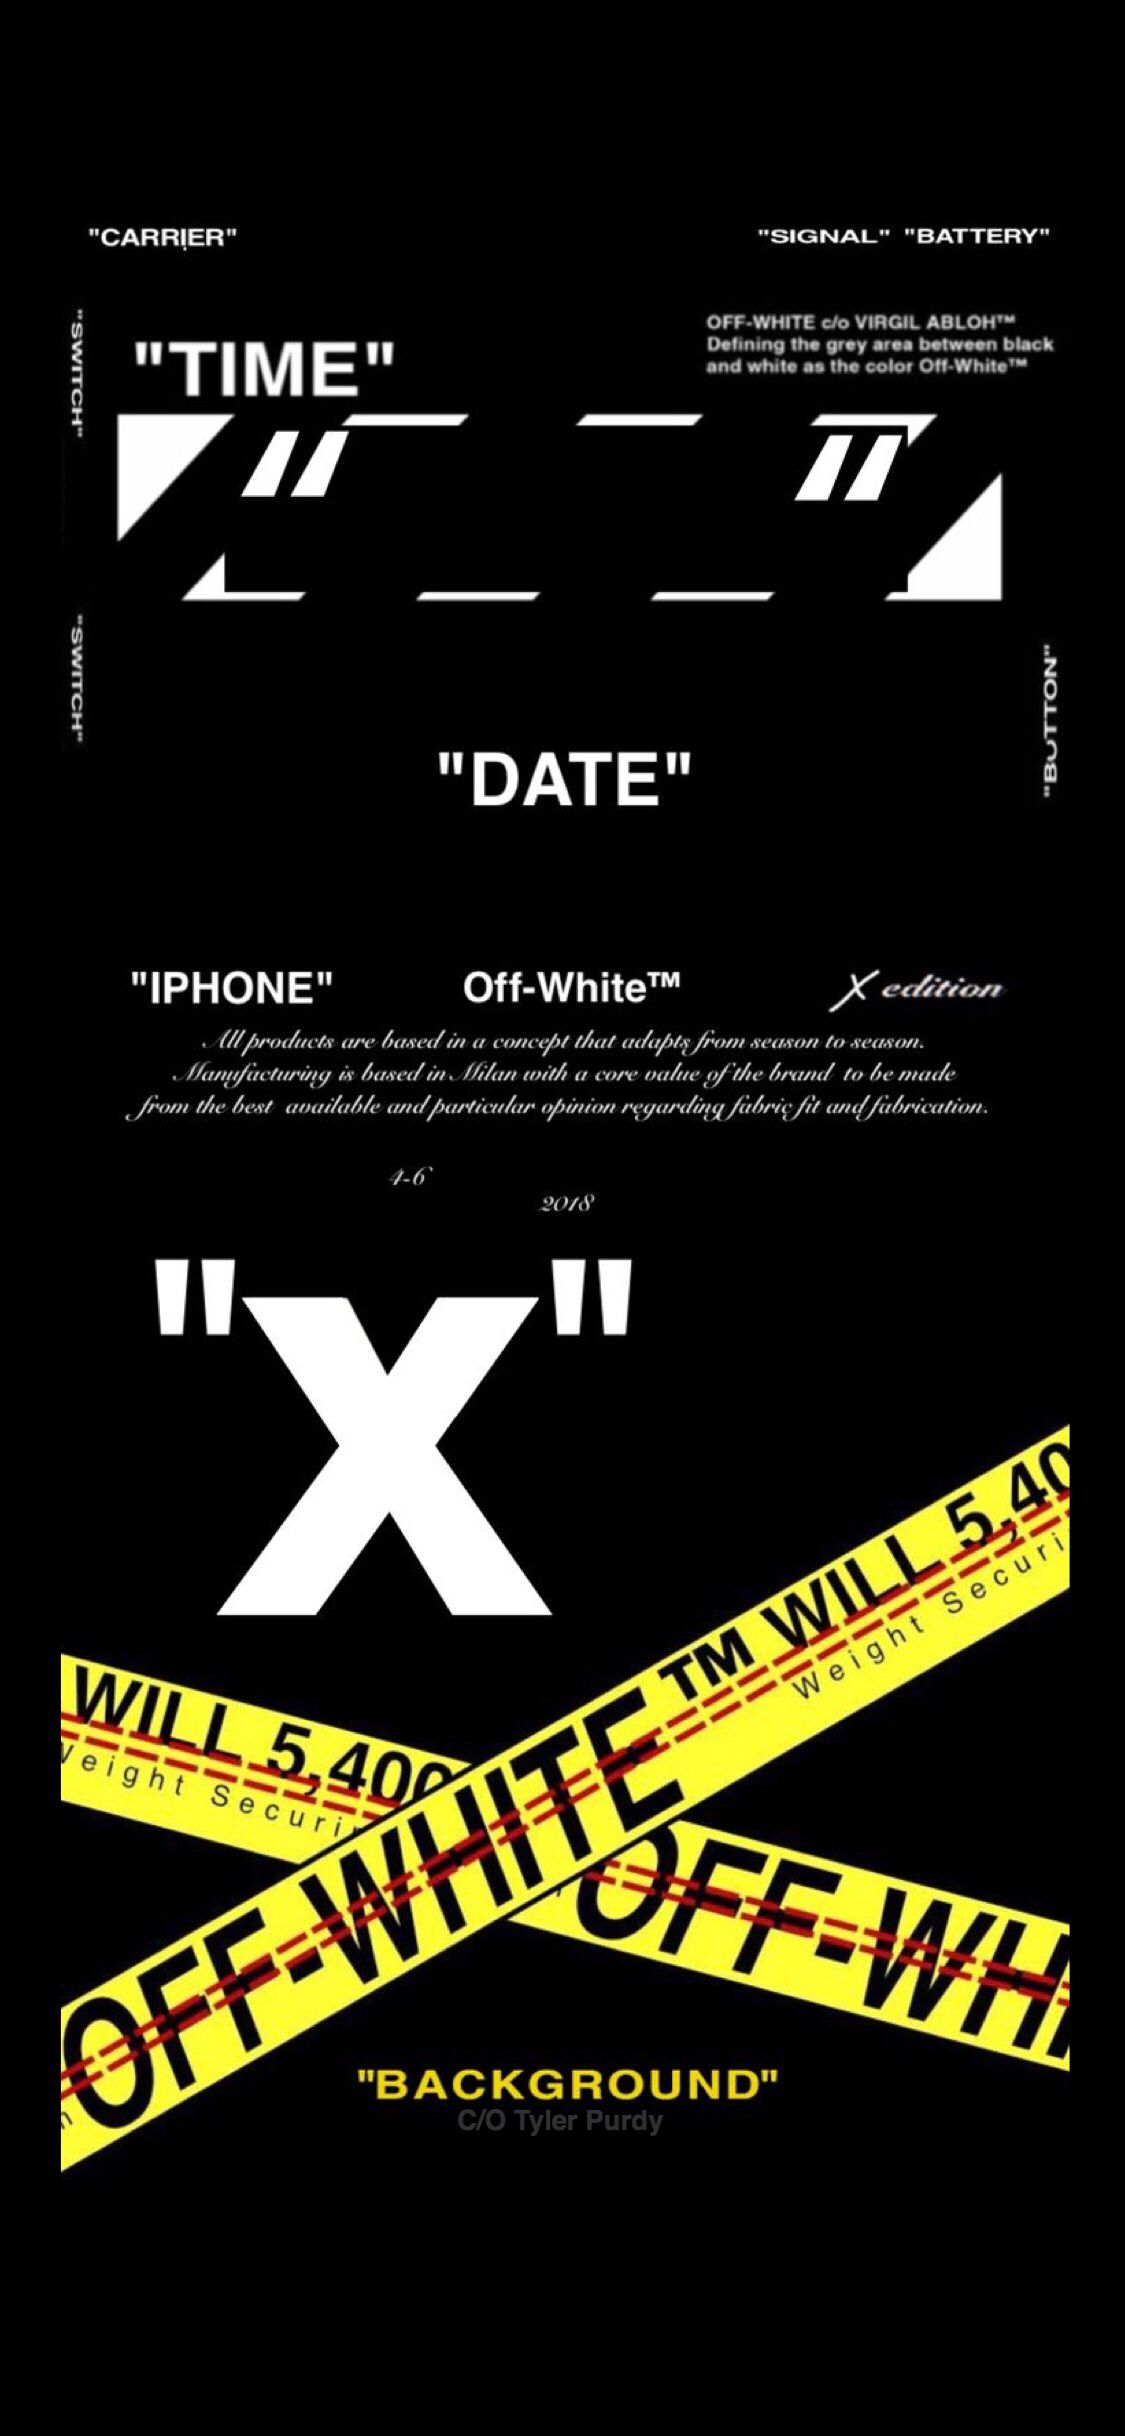 Off White Iphone X Background - HD Wallpaper 